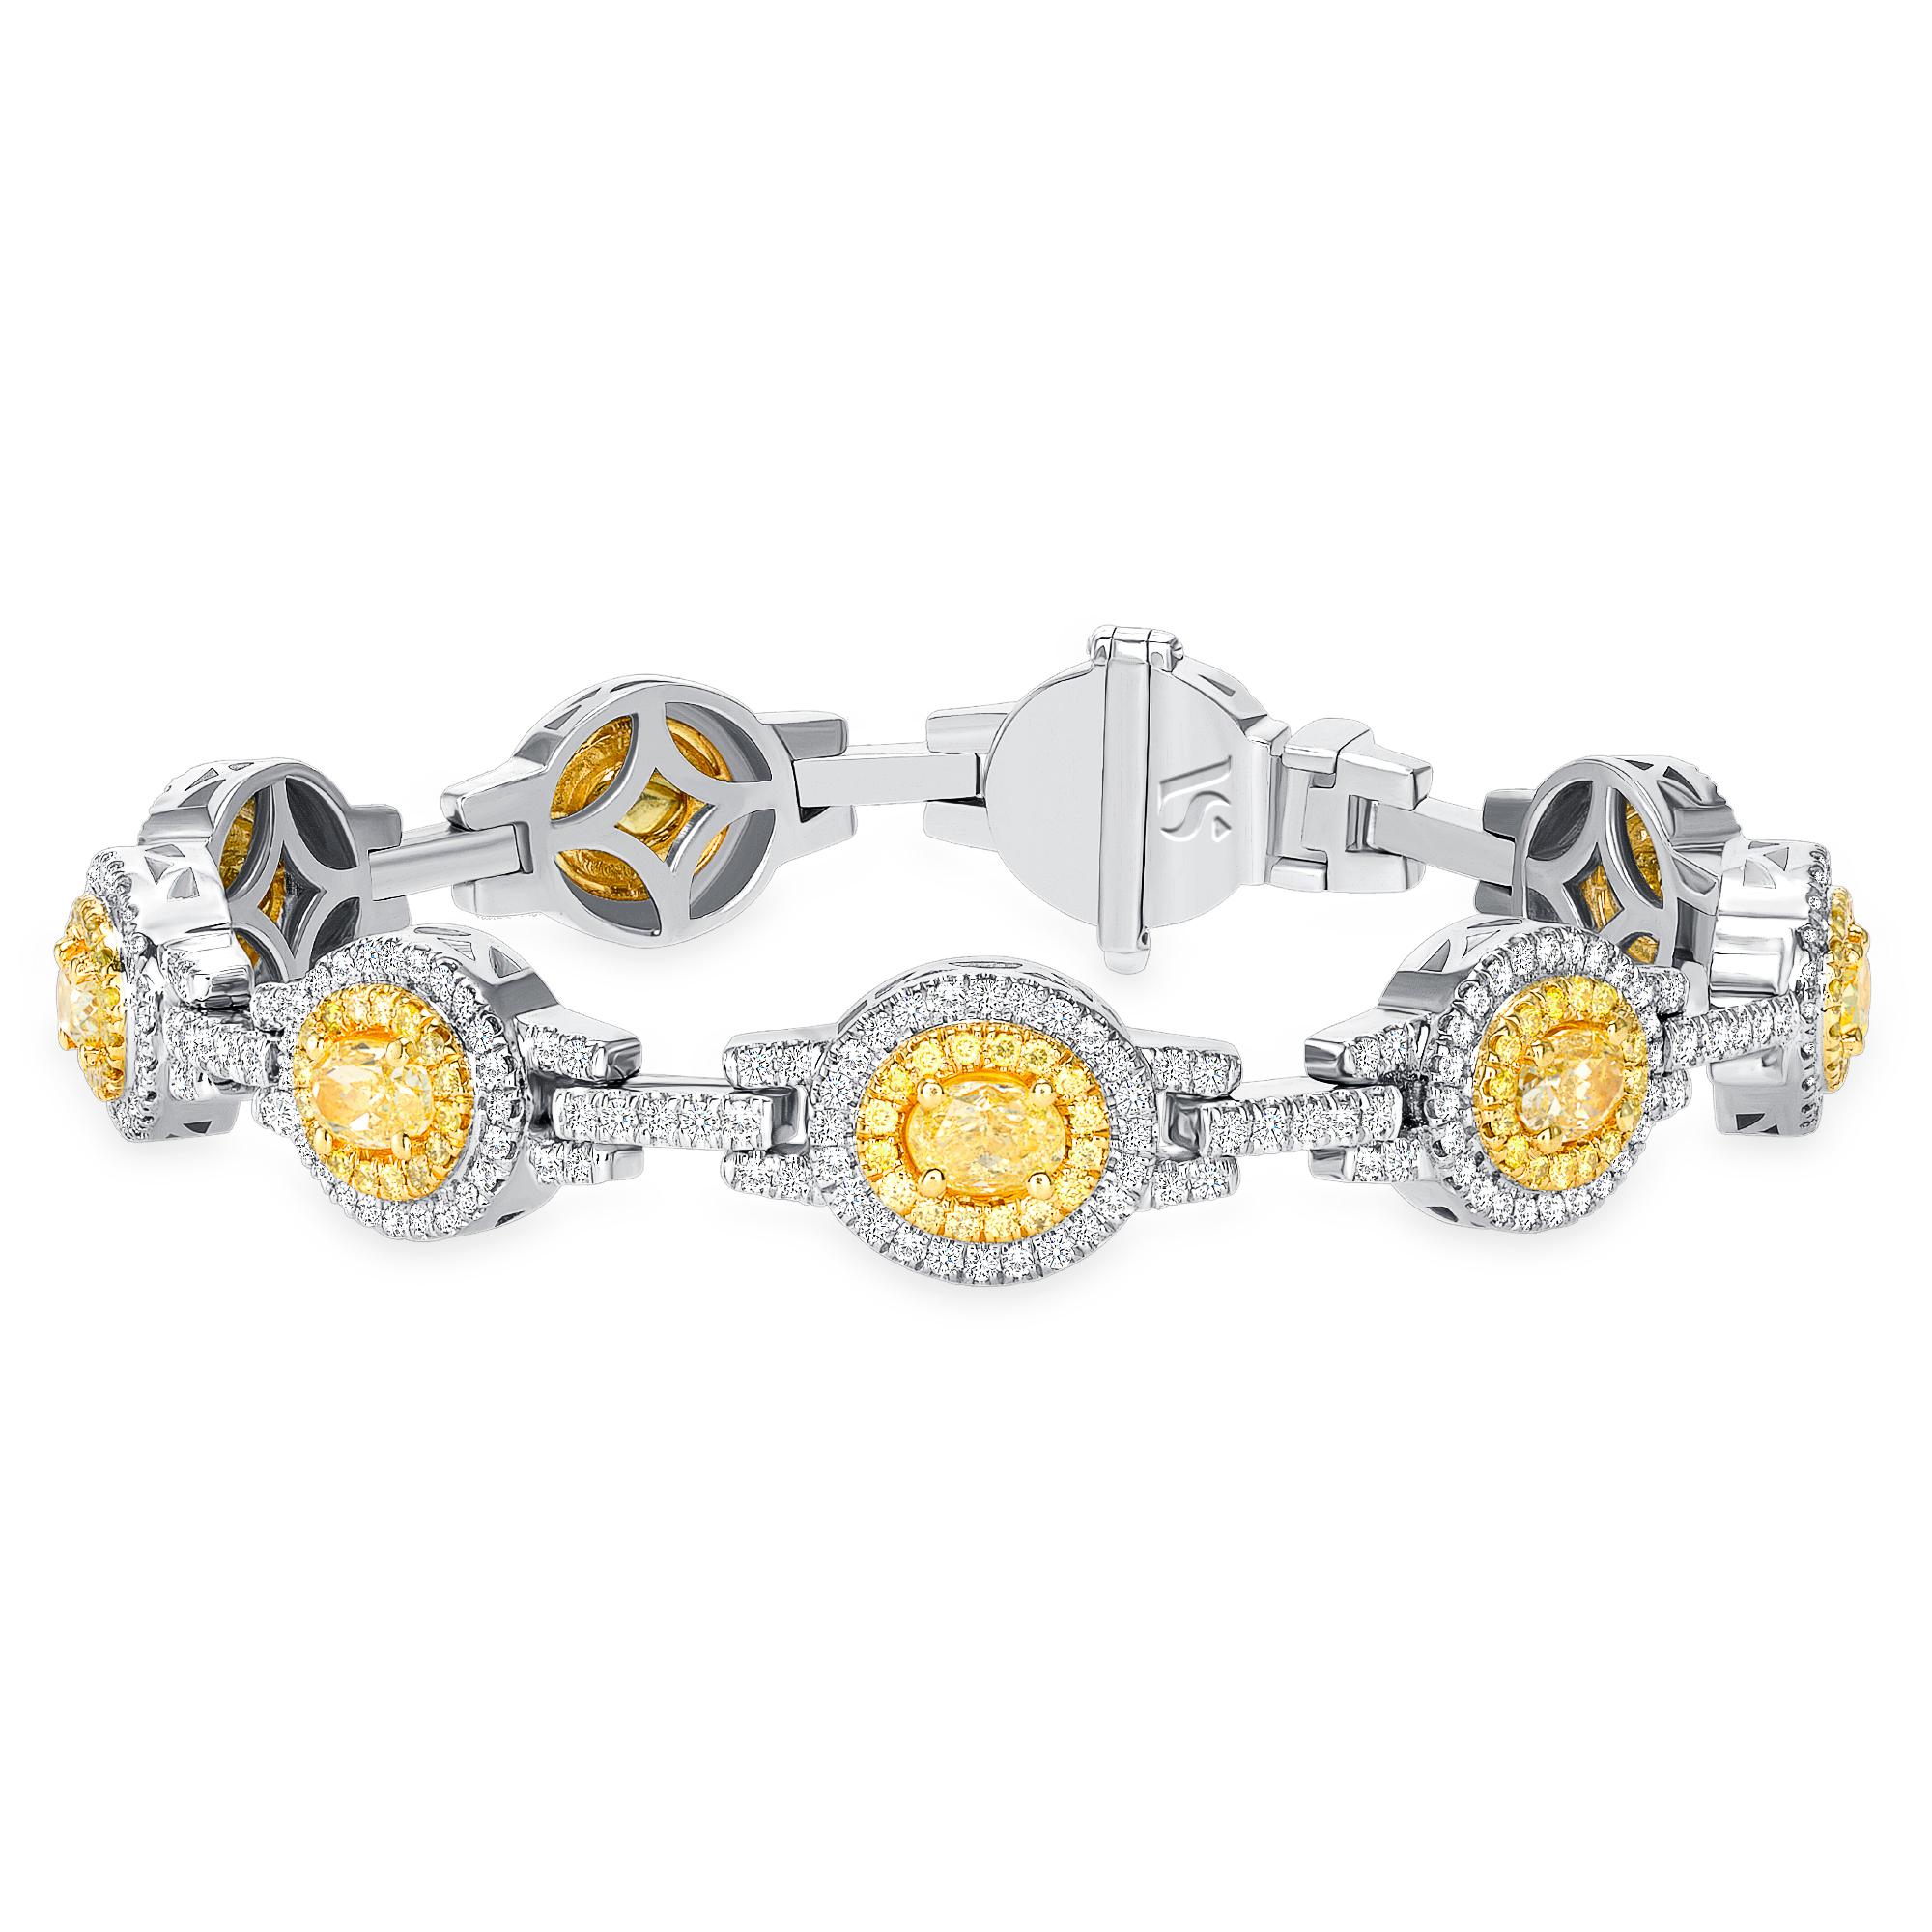 4.15 ct Fancy Yellow Oval Diamond 14k Gold Bracelet/One of a Kind Jewelry 

Symbolize your limitless nature with this stargaze bracelet. This High-end two-tone diamond bracelet features oval cut shapes diamond in the middle and surrounded by some